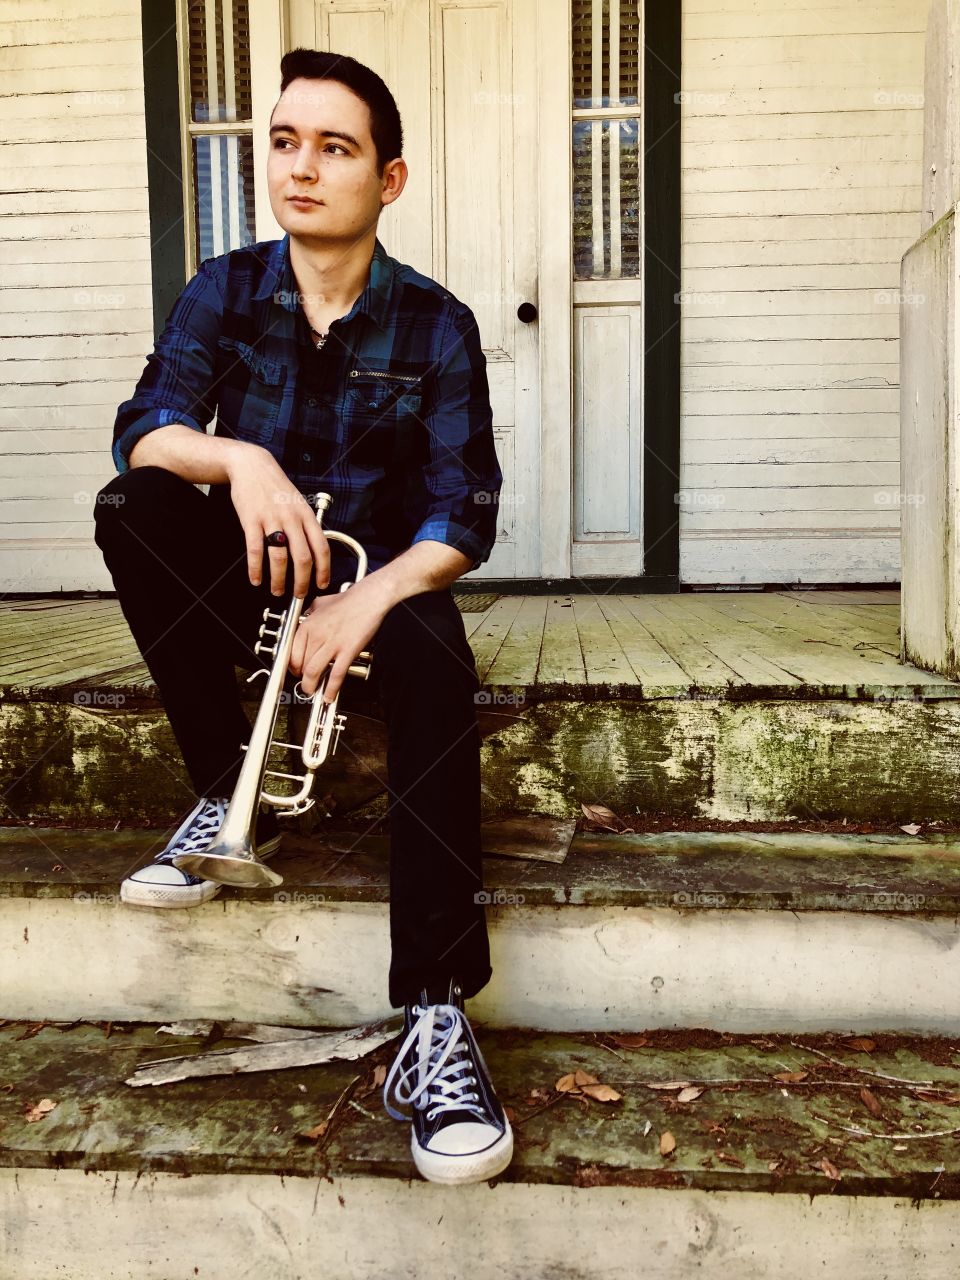 Took my brother’s senior pictures and we were able to capture these on the front porch of our grandparents’ old house on river road in Vacherie, Louisiana where the recent Netflix movie Mudbound was filmed😍